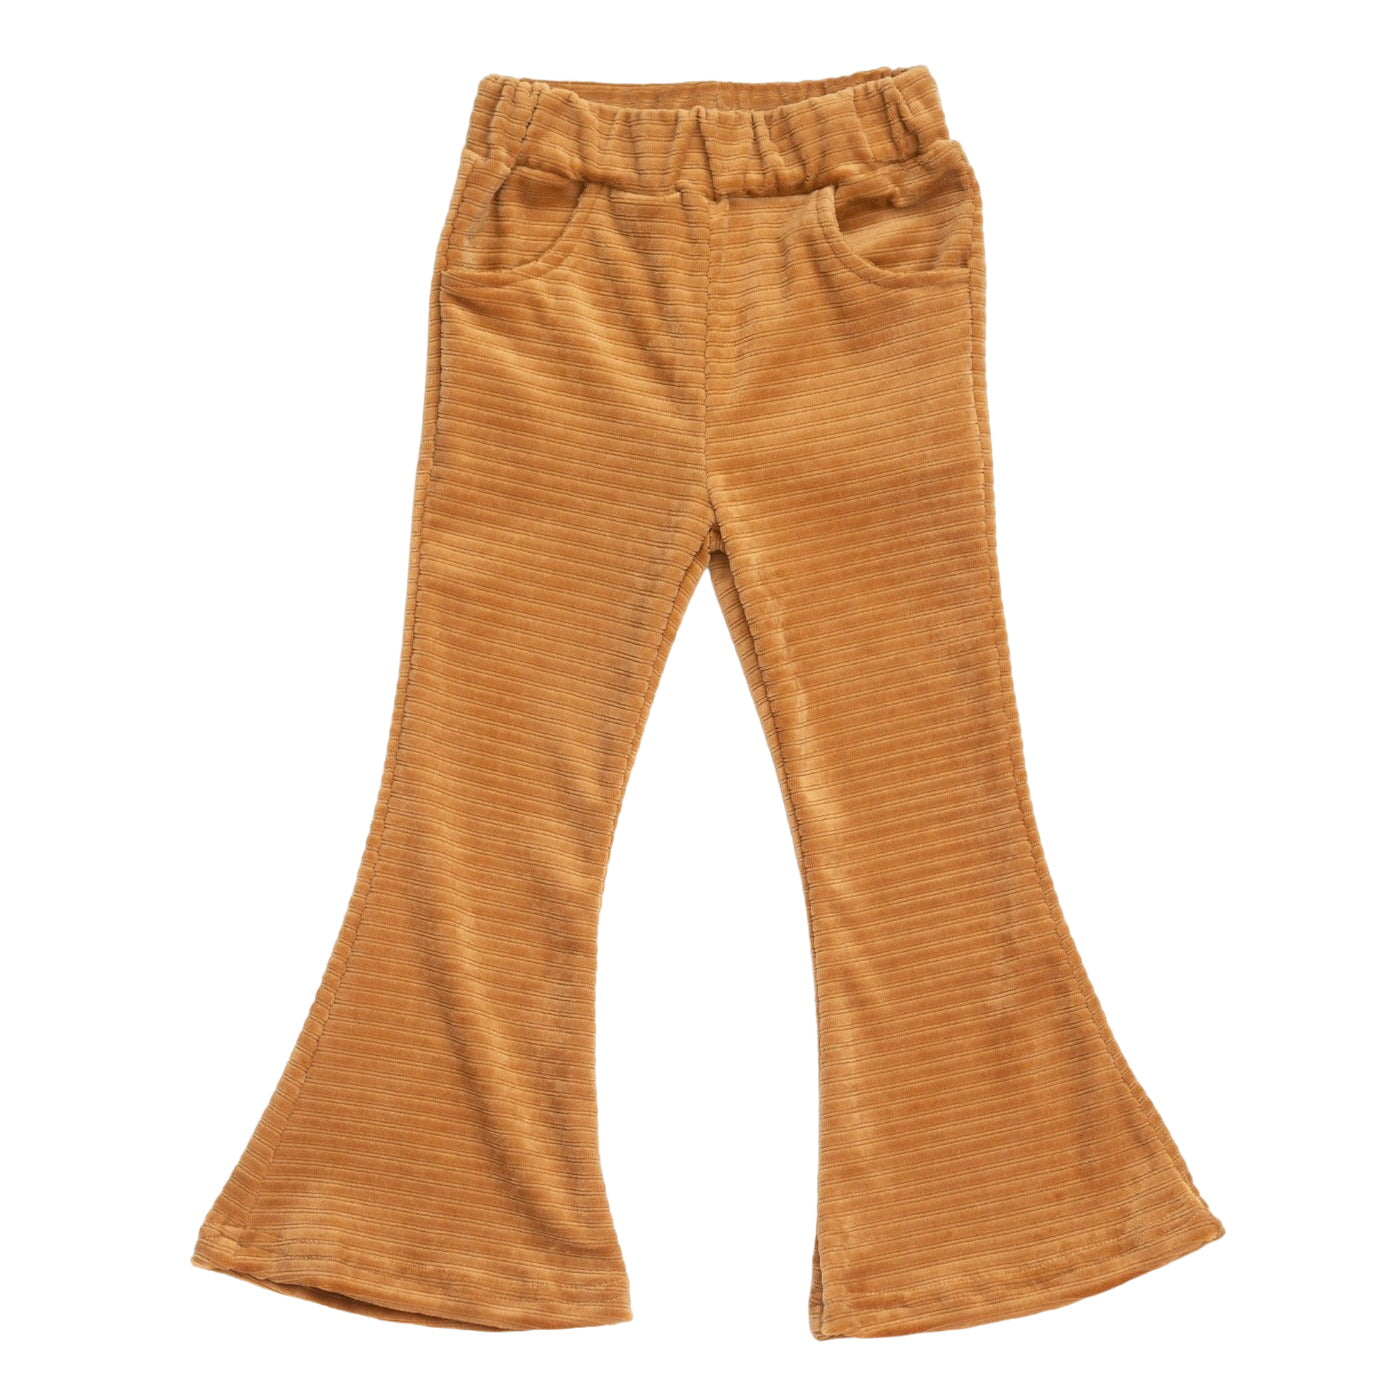 Golden Brown Velour Corduroy Bell Bottoms For Babies, Toddler And Girls